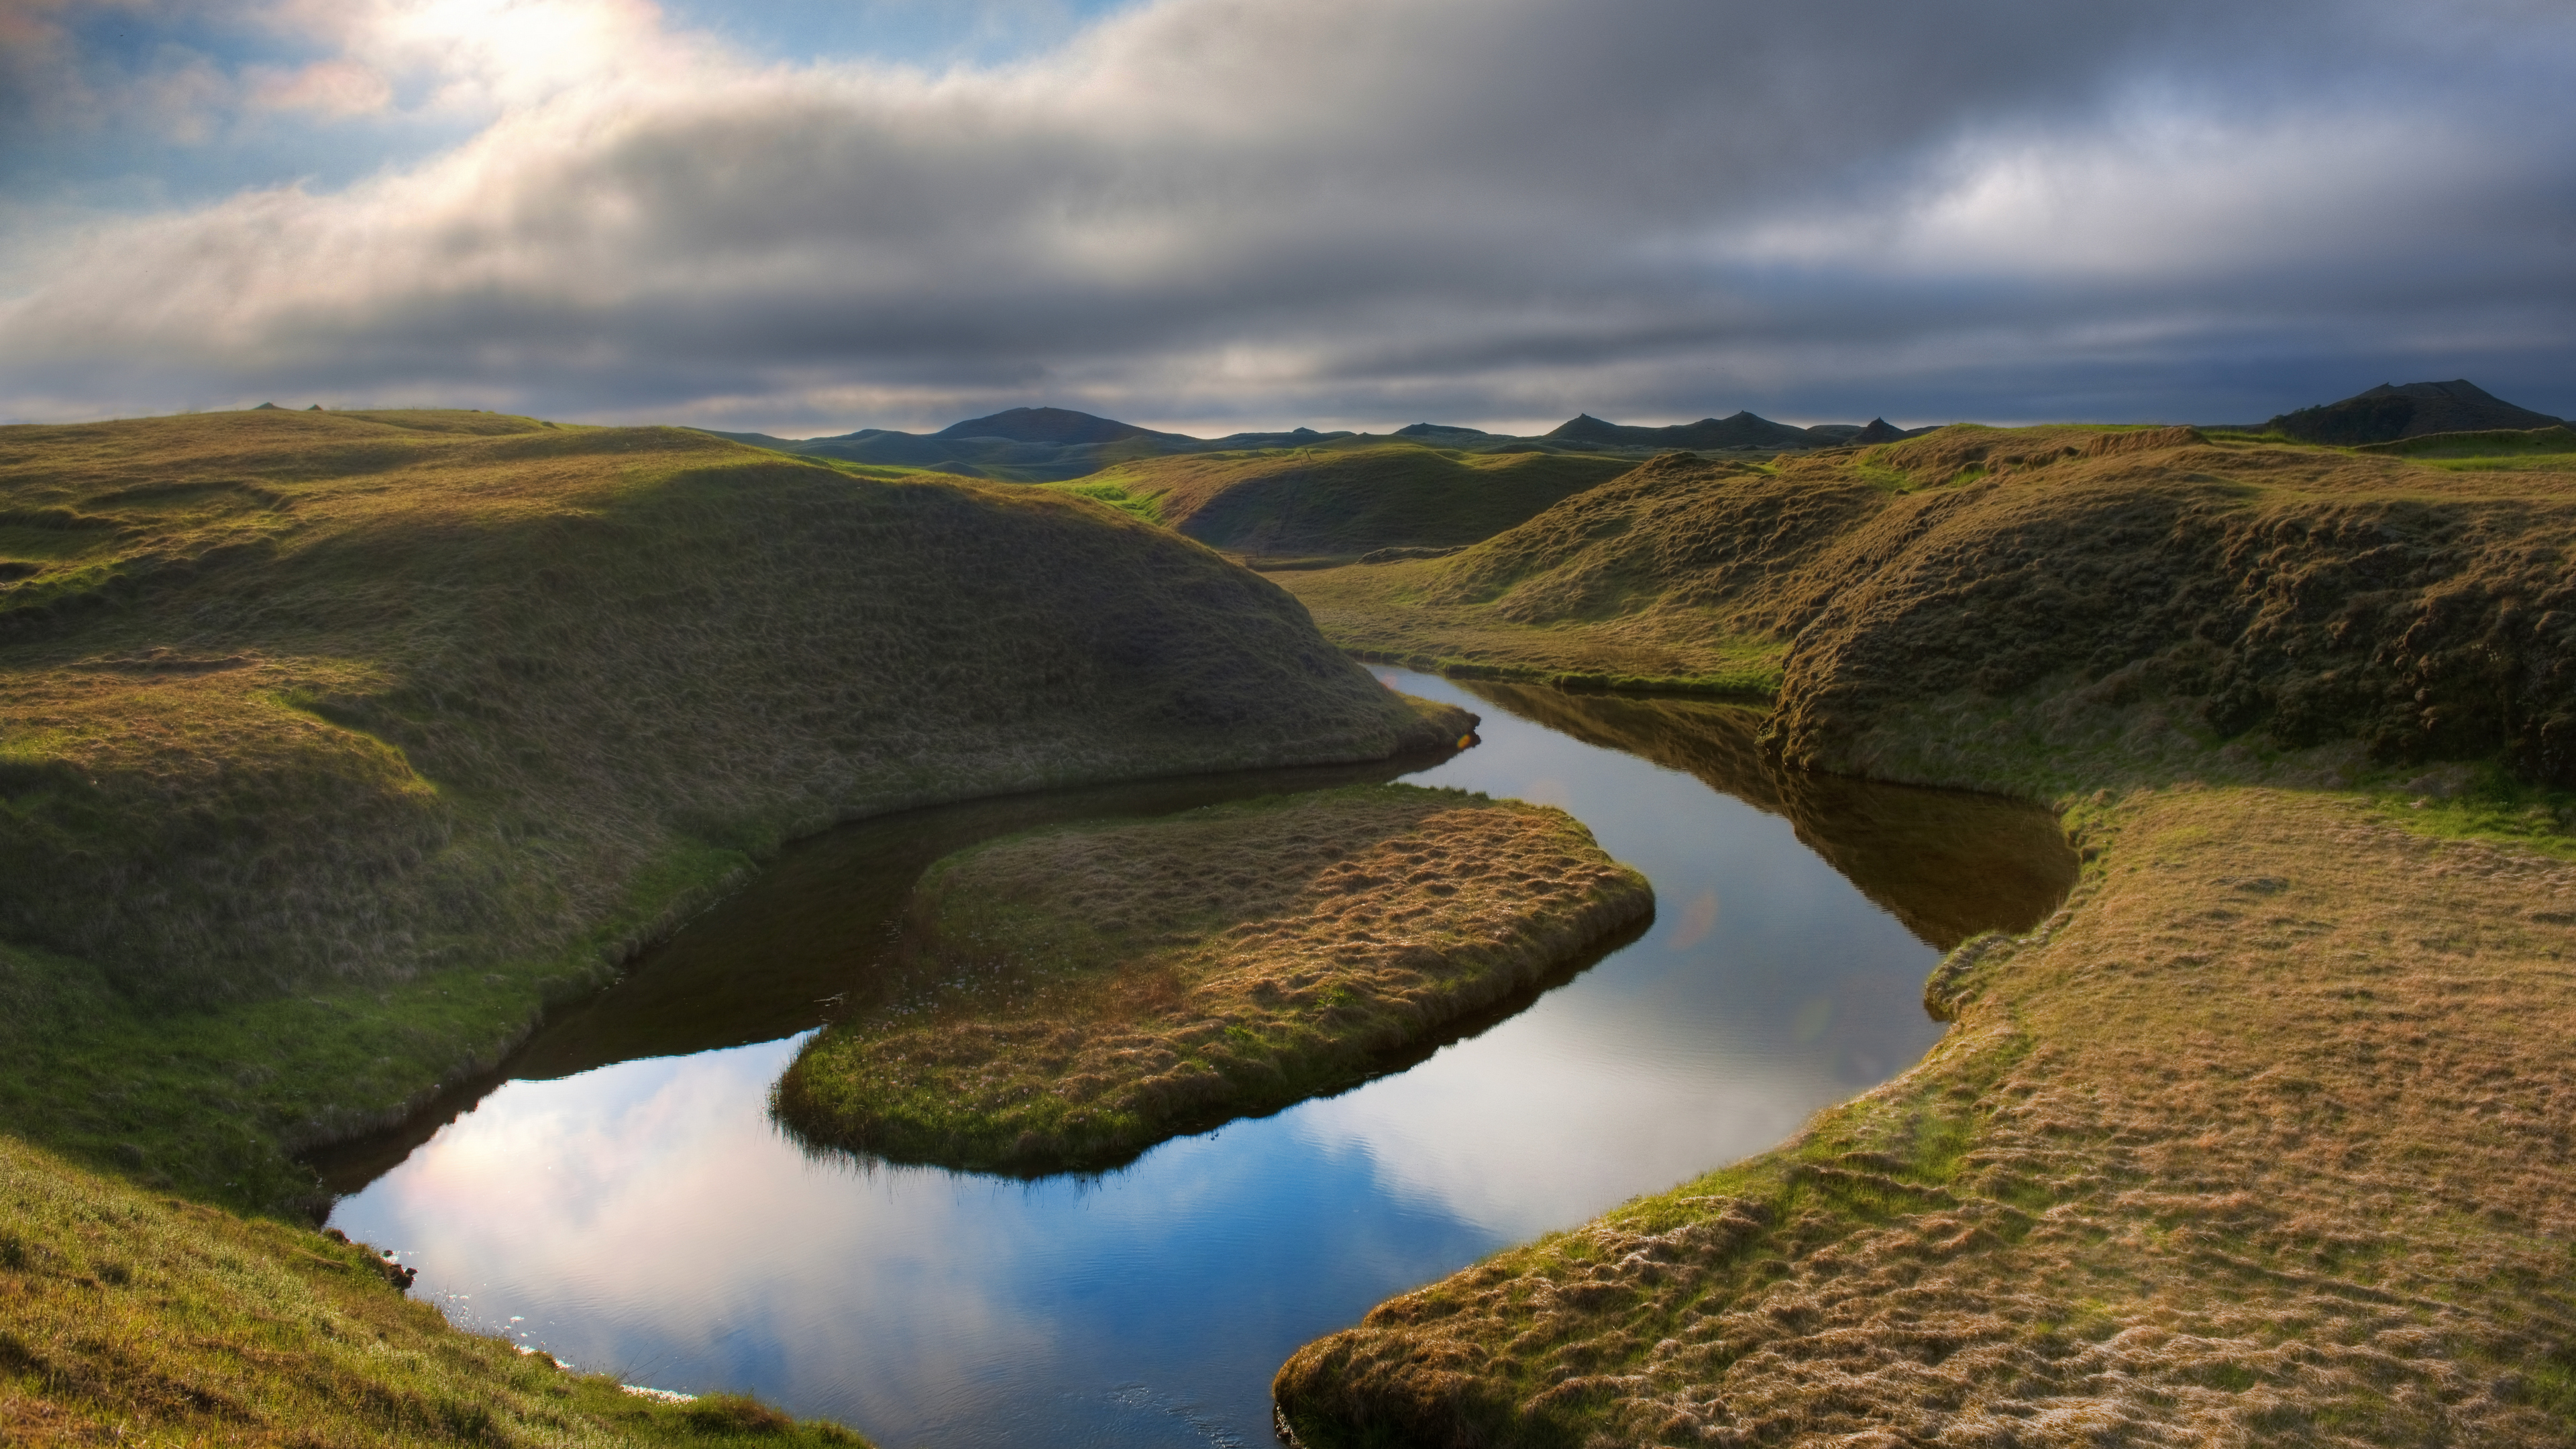 General 3840x2160 landscape Iceland Trey Ratcliff photography nature water hills grass clouds reflection